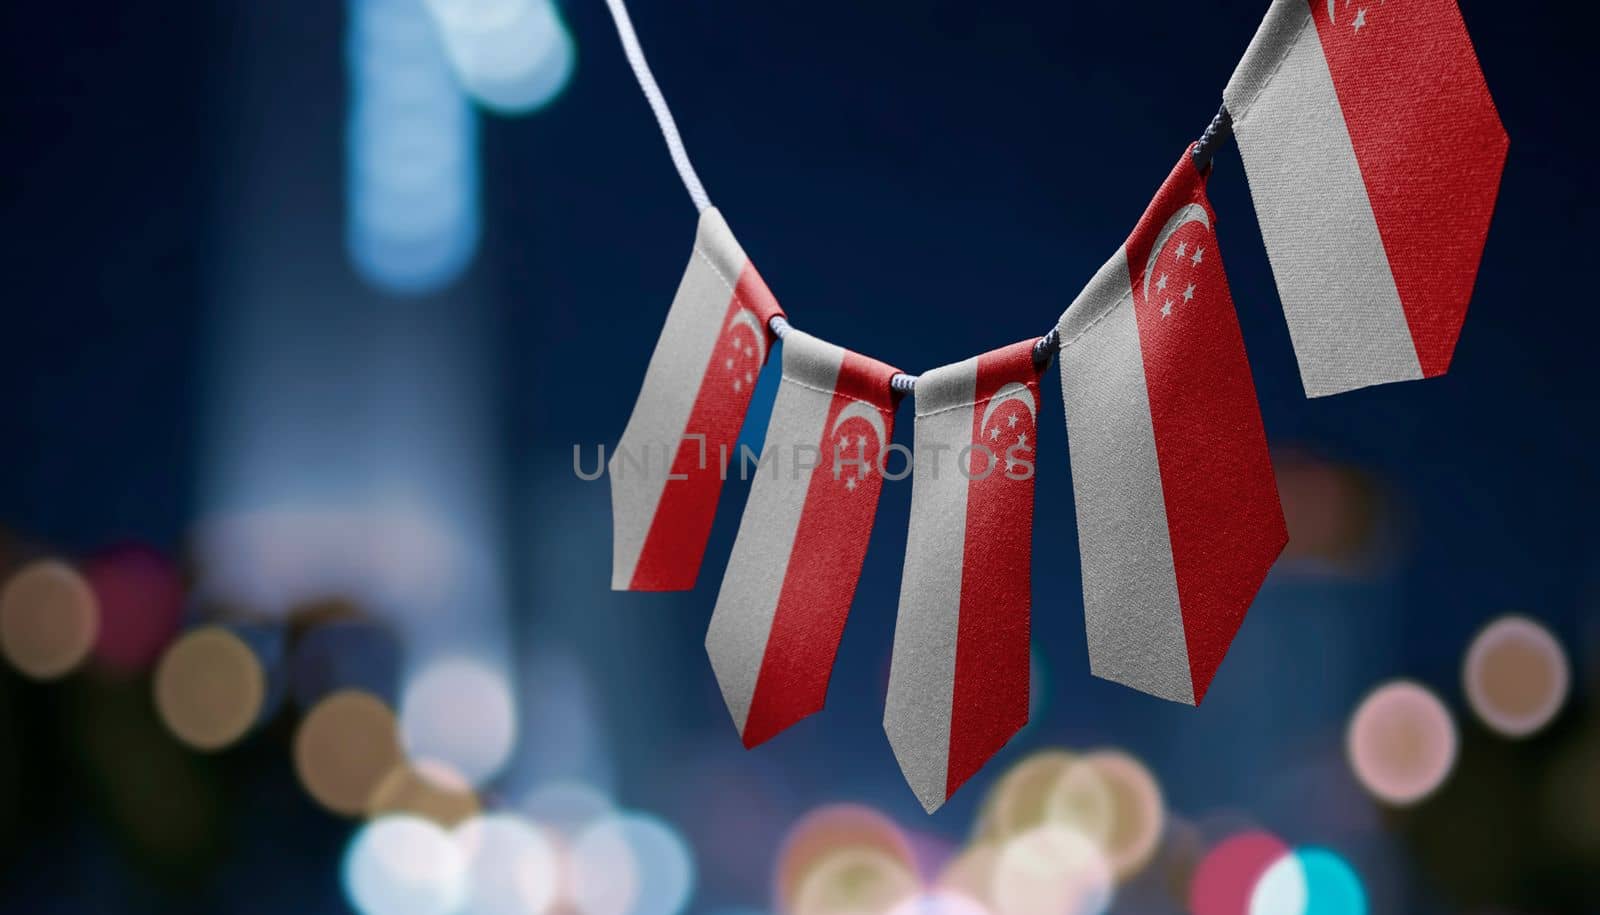 A garland of Singapore national flags on an abstract blurred background by butenkow